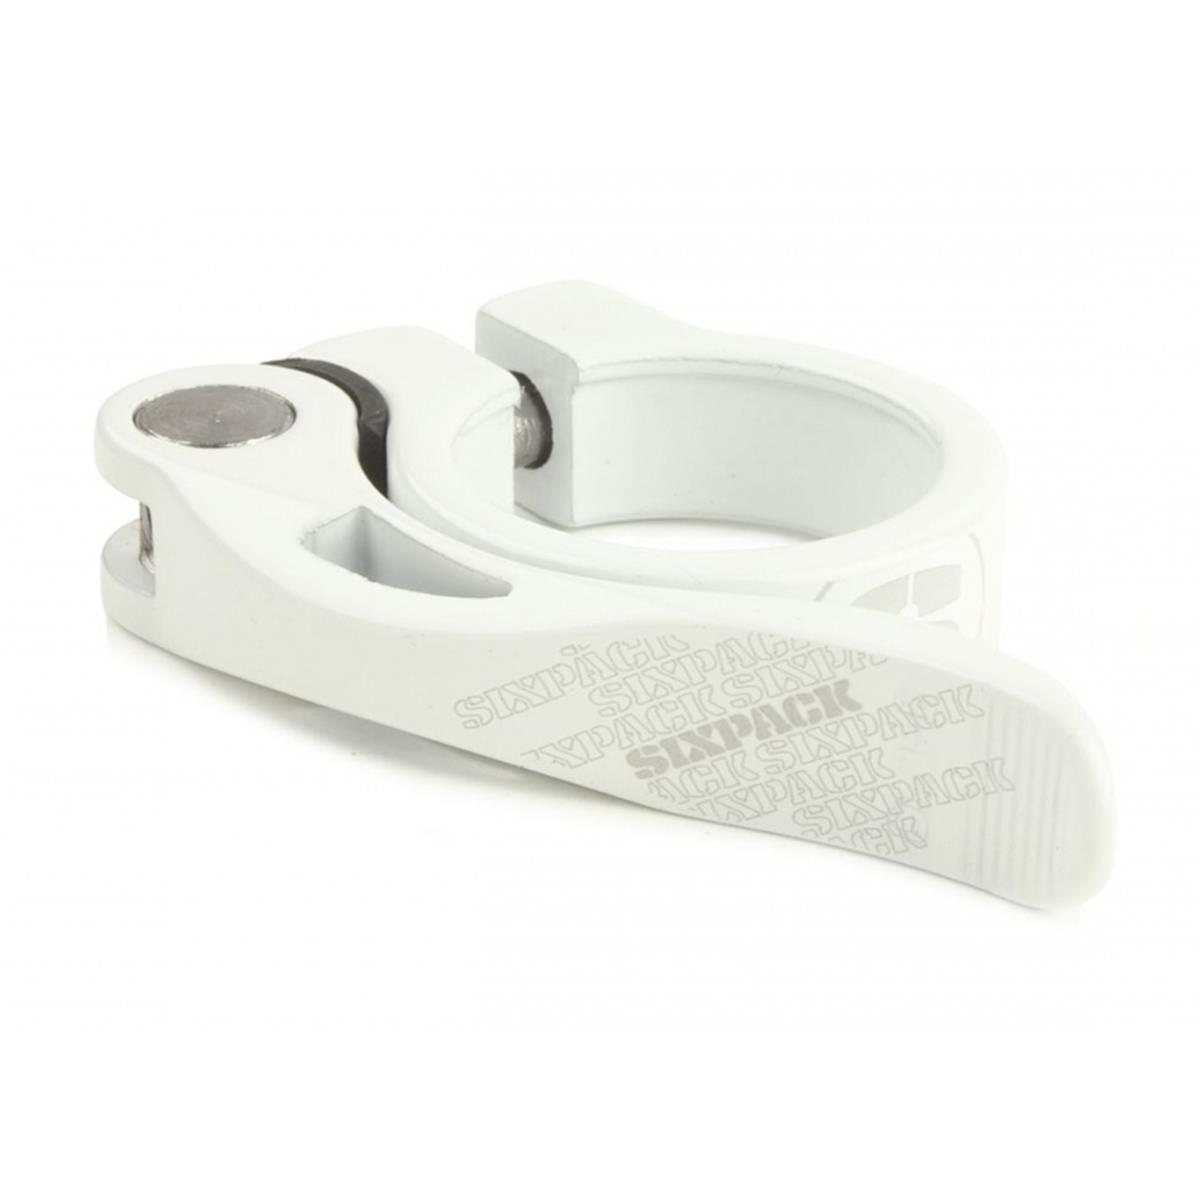 Sixpack Seat Clamp  White, 34.9 mm, Quick-Release